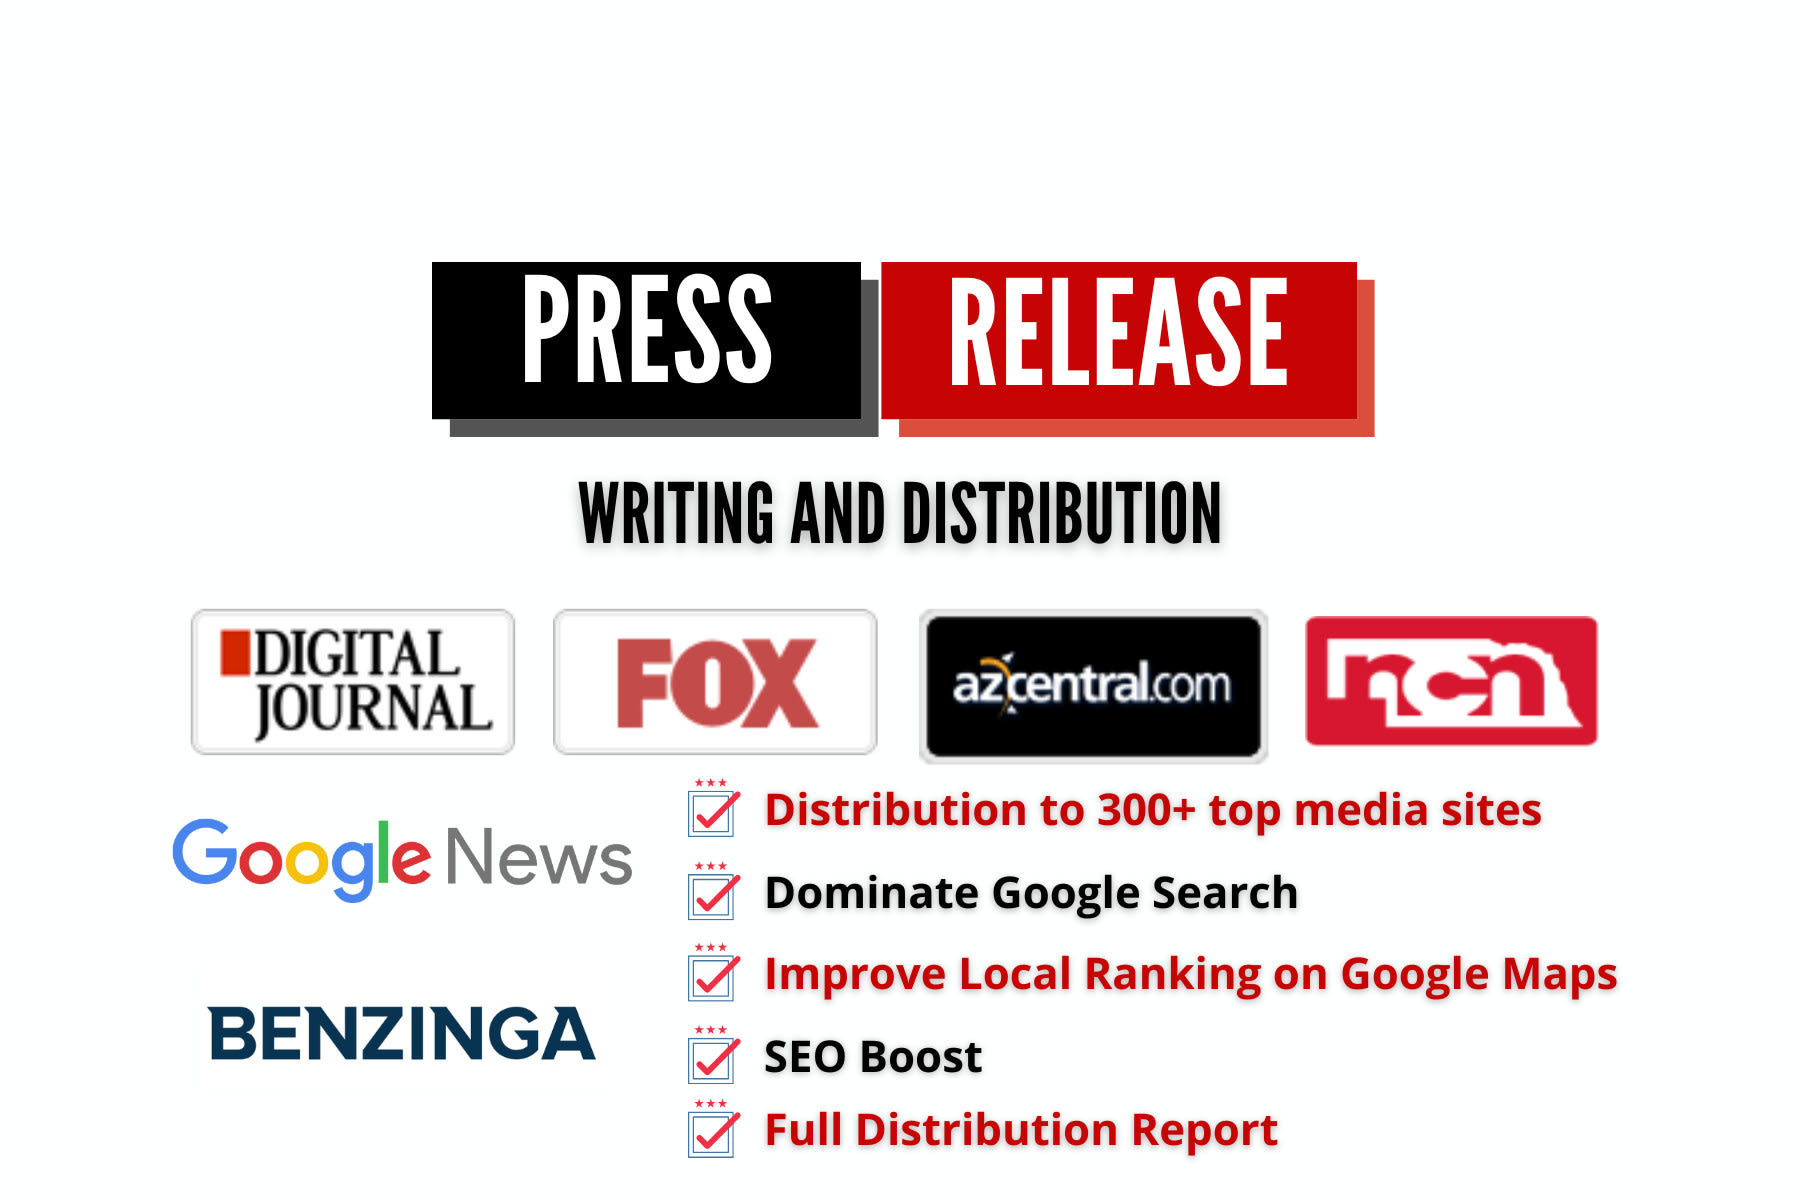 Write press release and do press release distribution by Webfivez | Fiverr